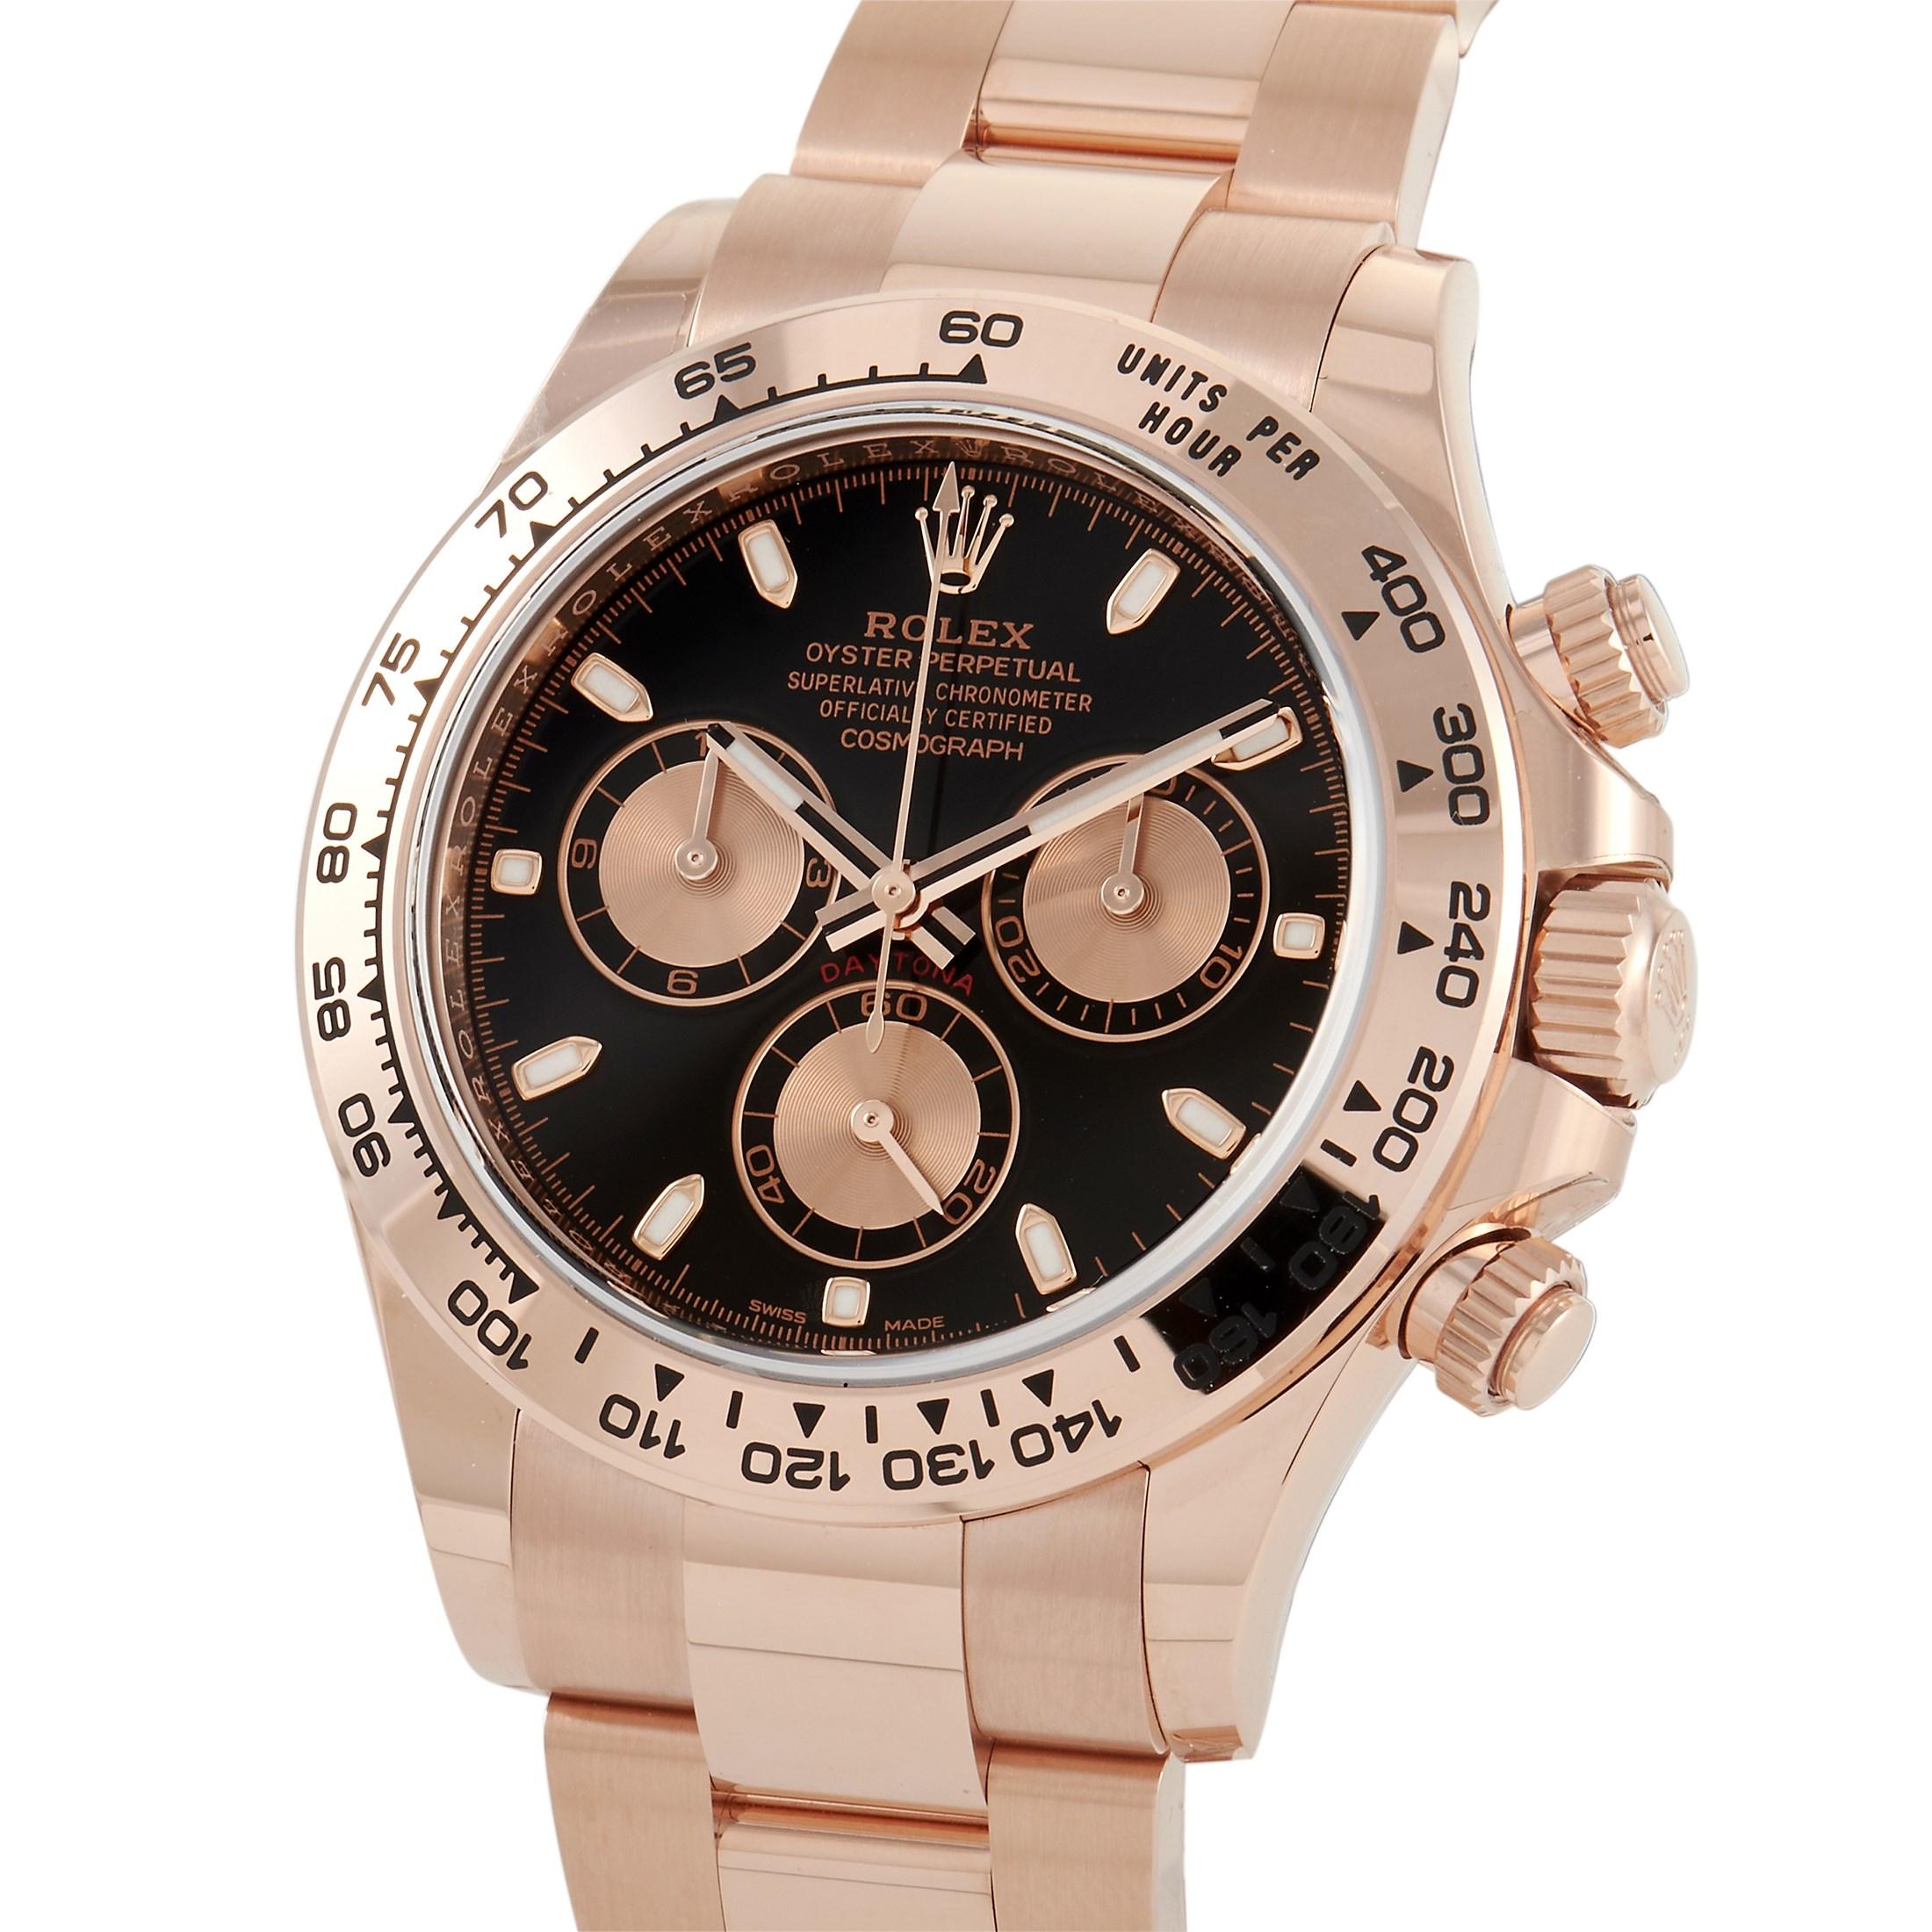 Seamlessly blending classic and modern trends, the Rolex Cosmograph Daytona Everose Gold & Black Men's Chronograph Watch 116505 will become your next favorite timepiece. This watch has a 40mm case and a black dial with three rose gold sub-dials. The